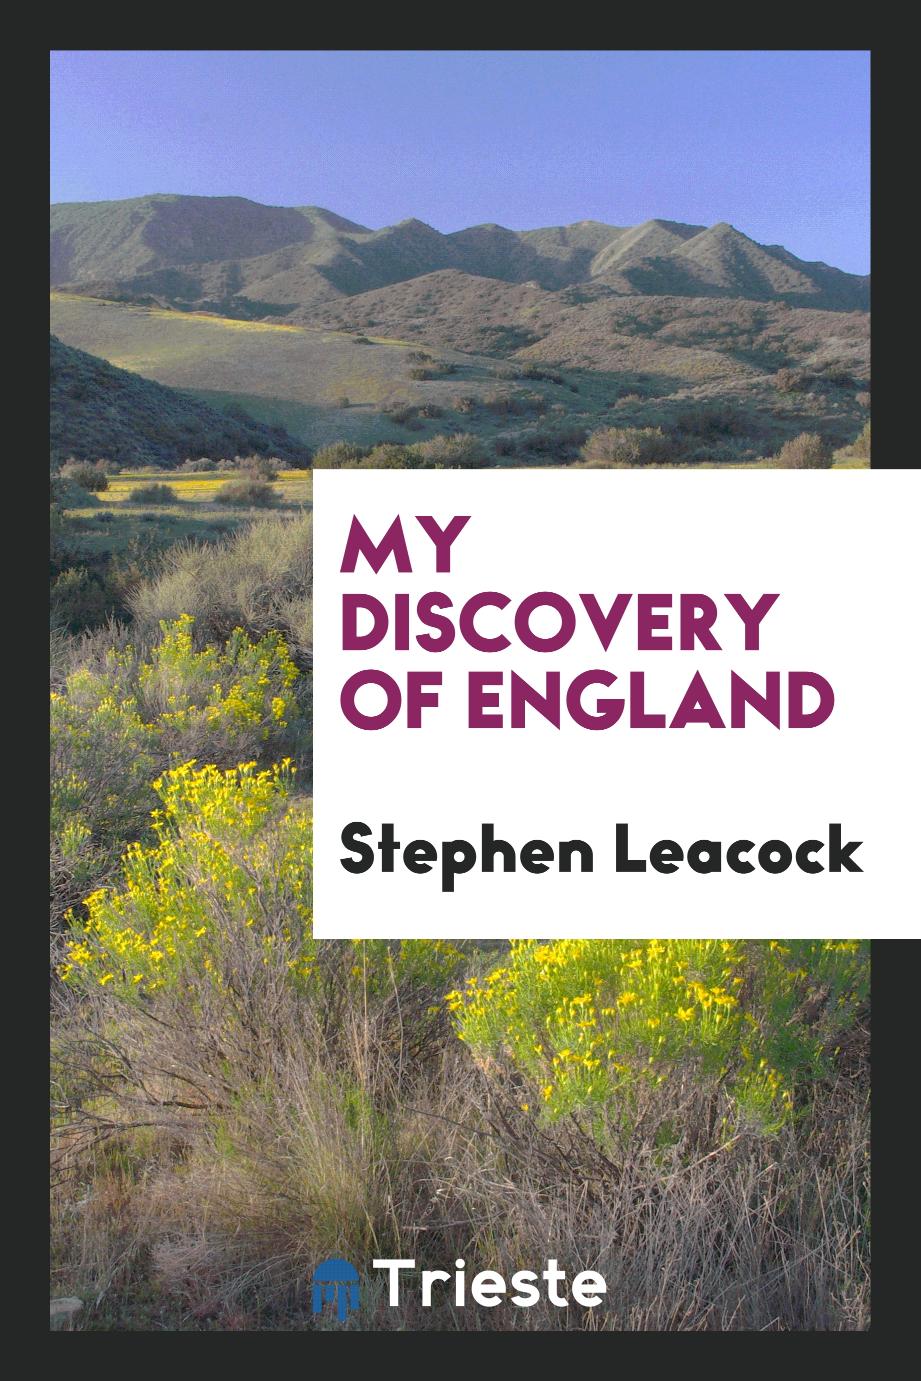 My discovery of England